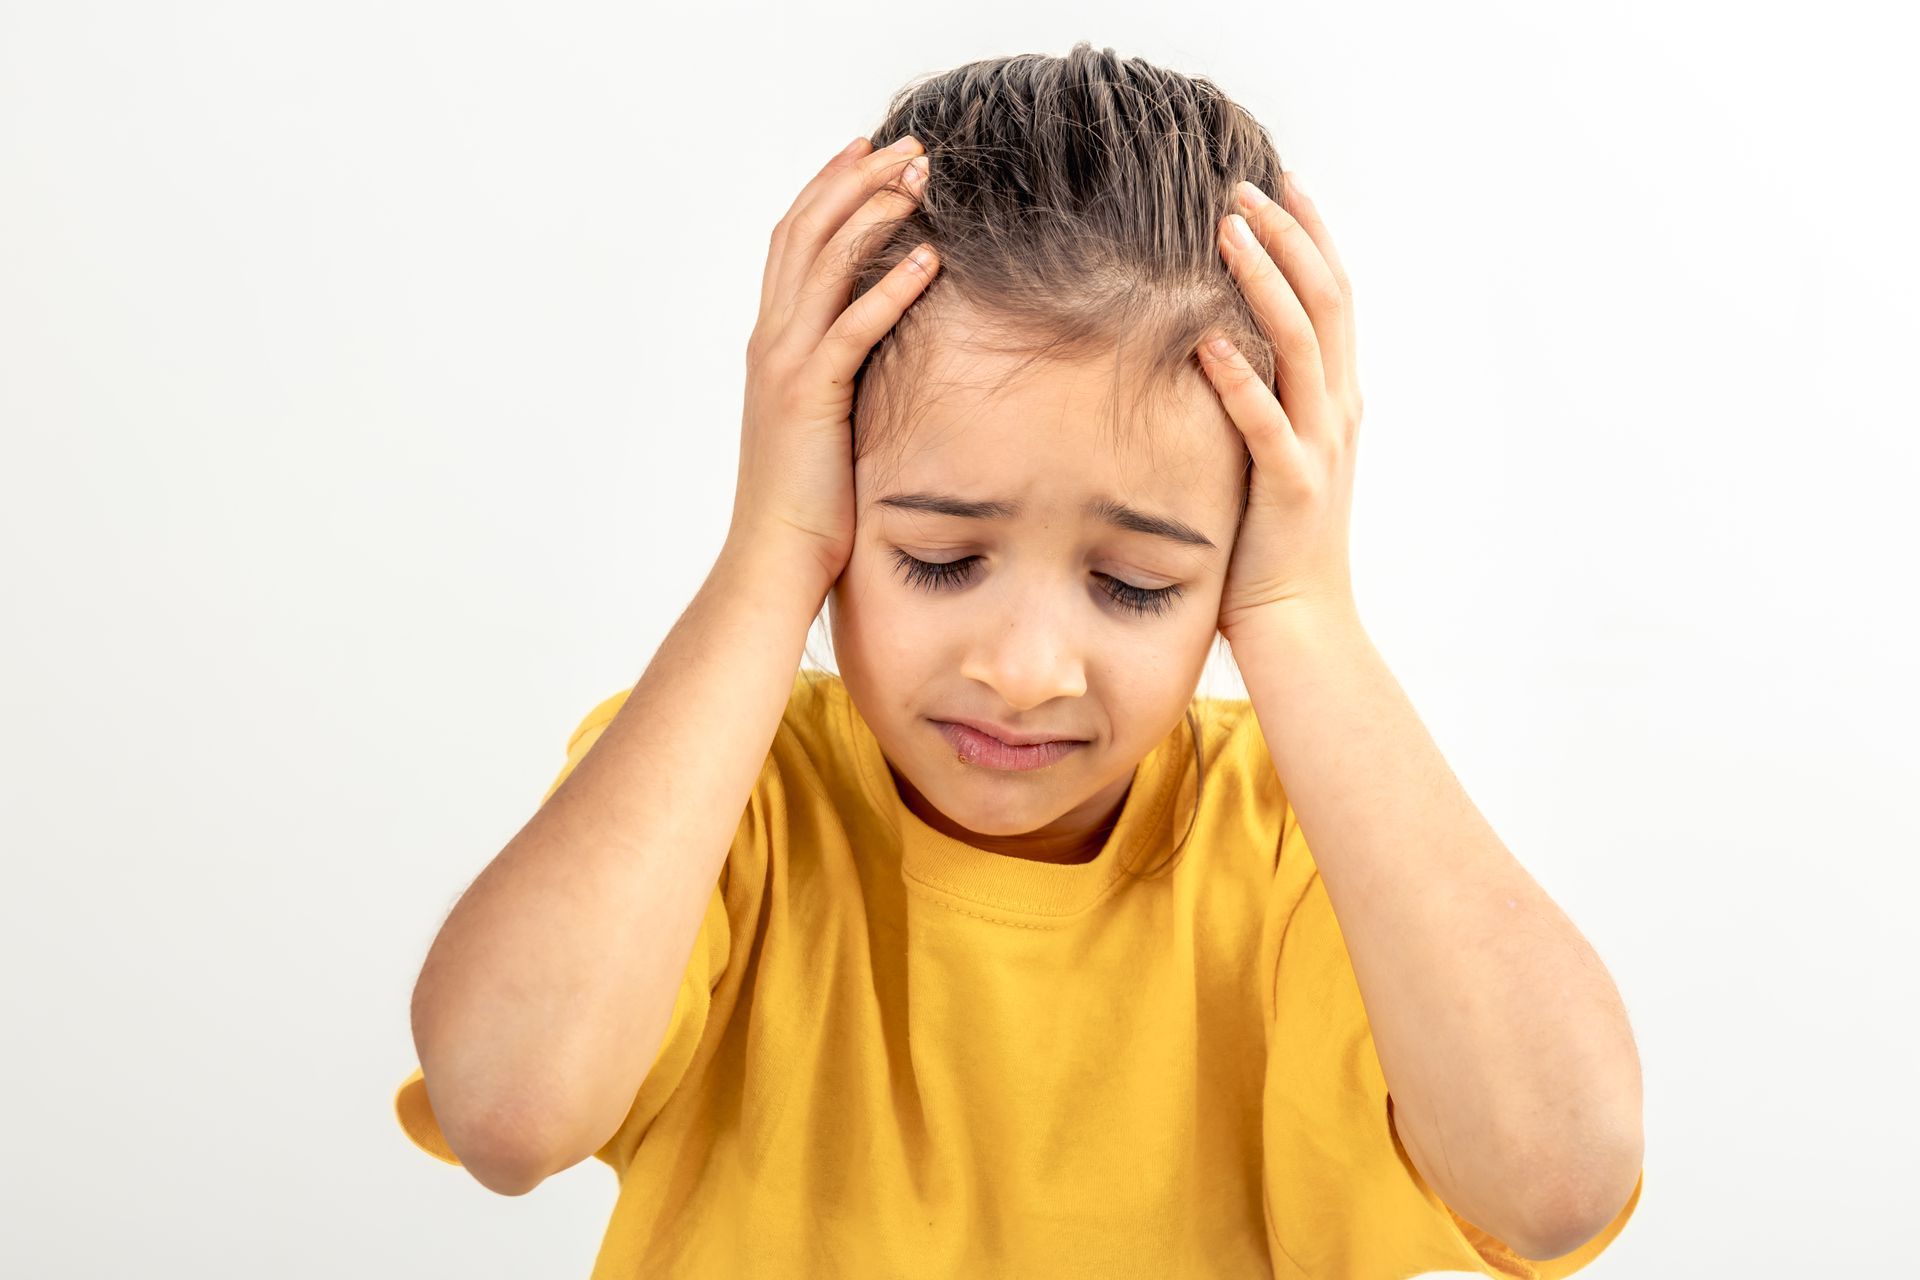 Does My Child Have a Migraine or Headache?